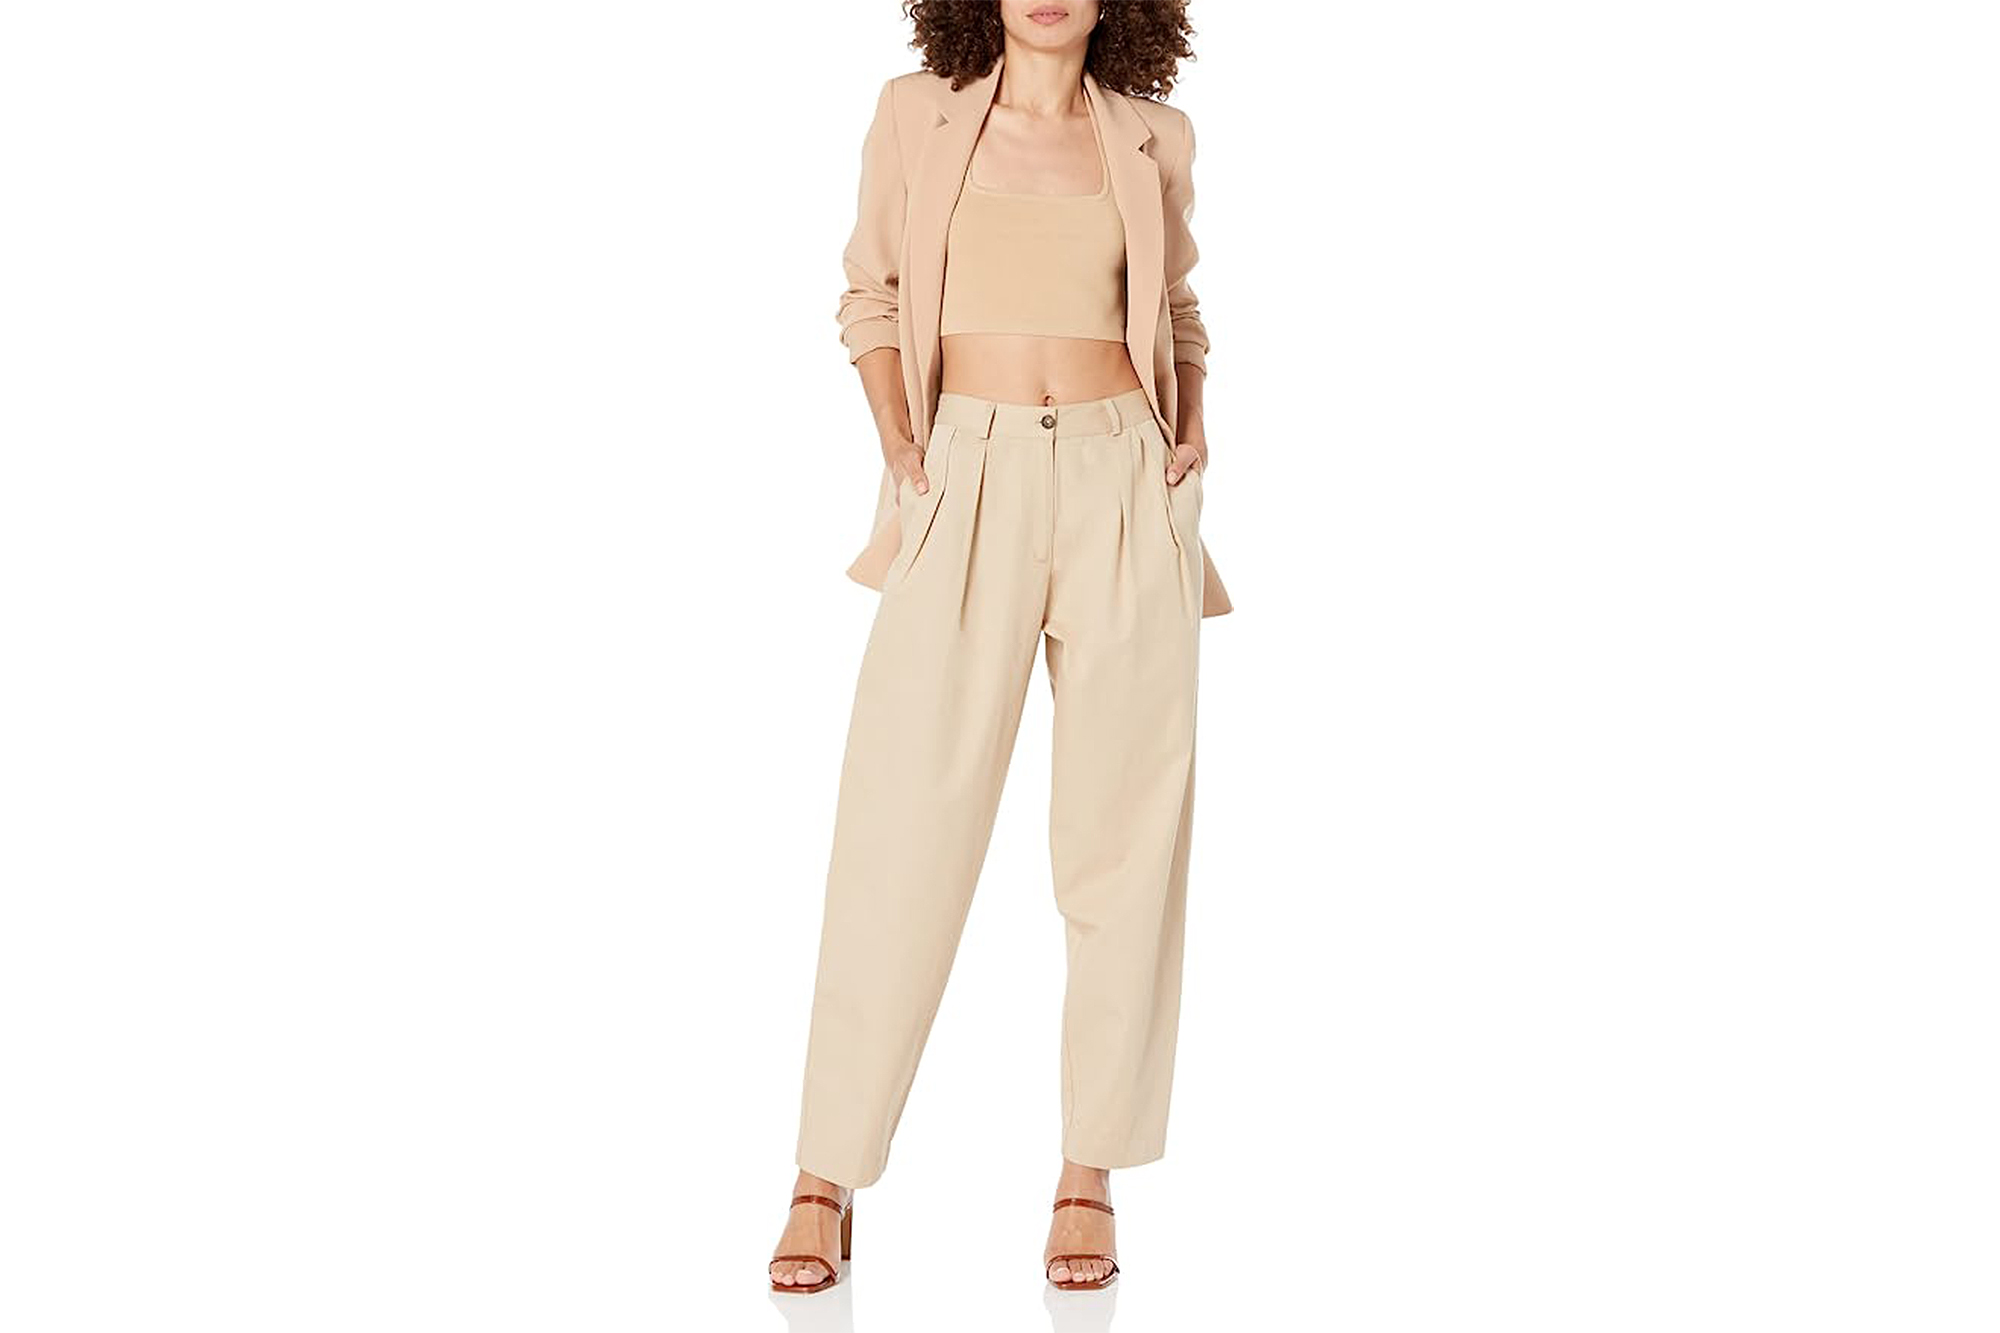 The Drop High-Waisted Pants Will Make You Feel Confident